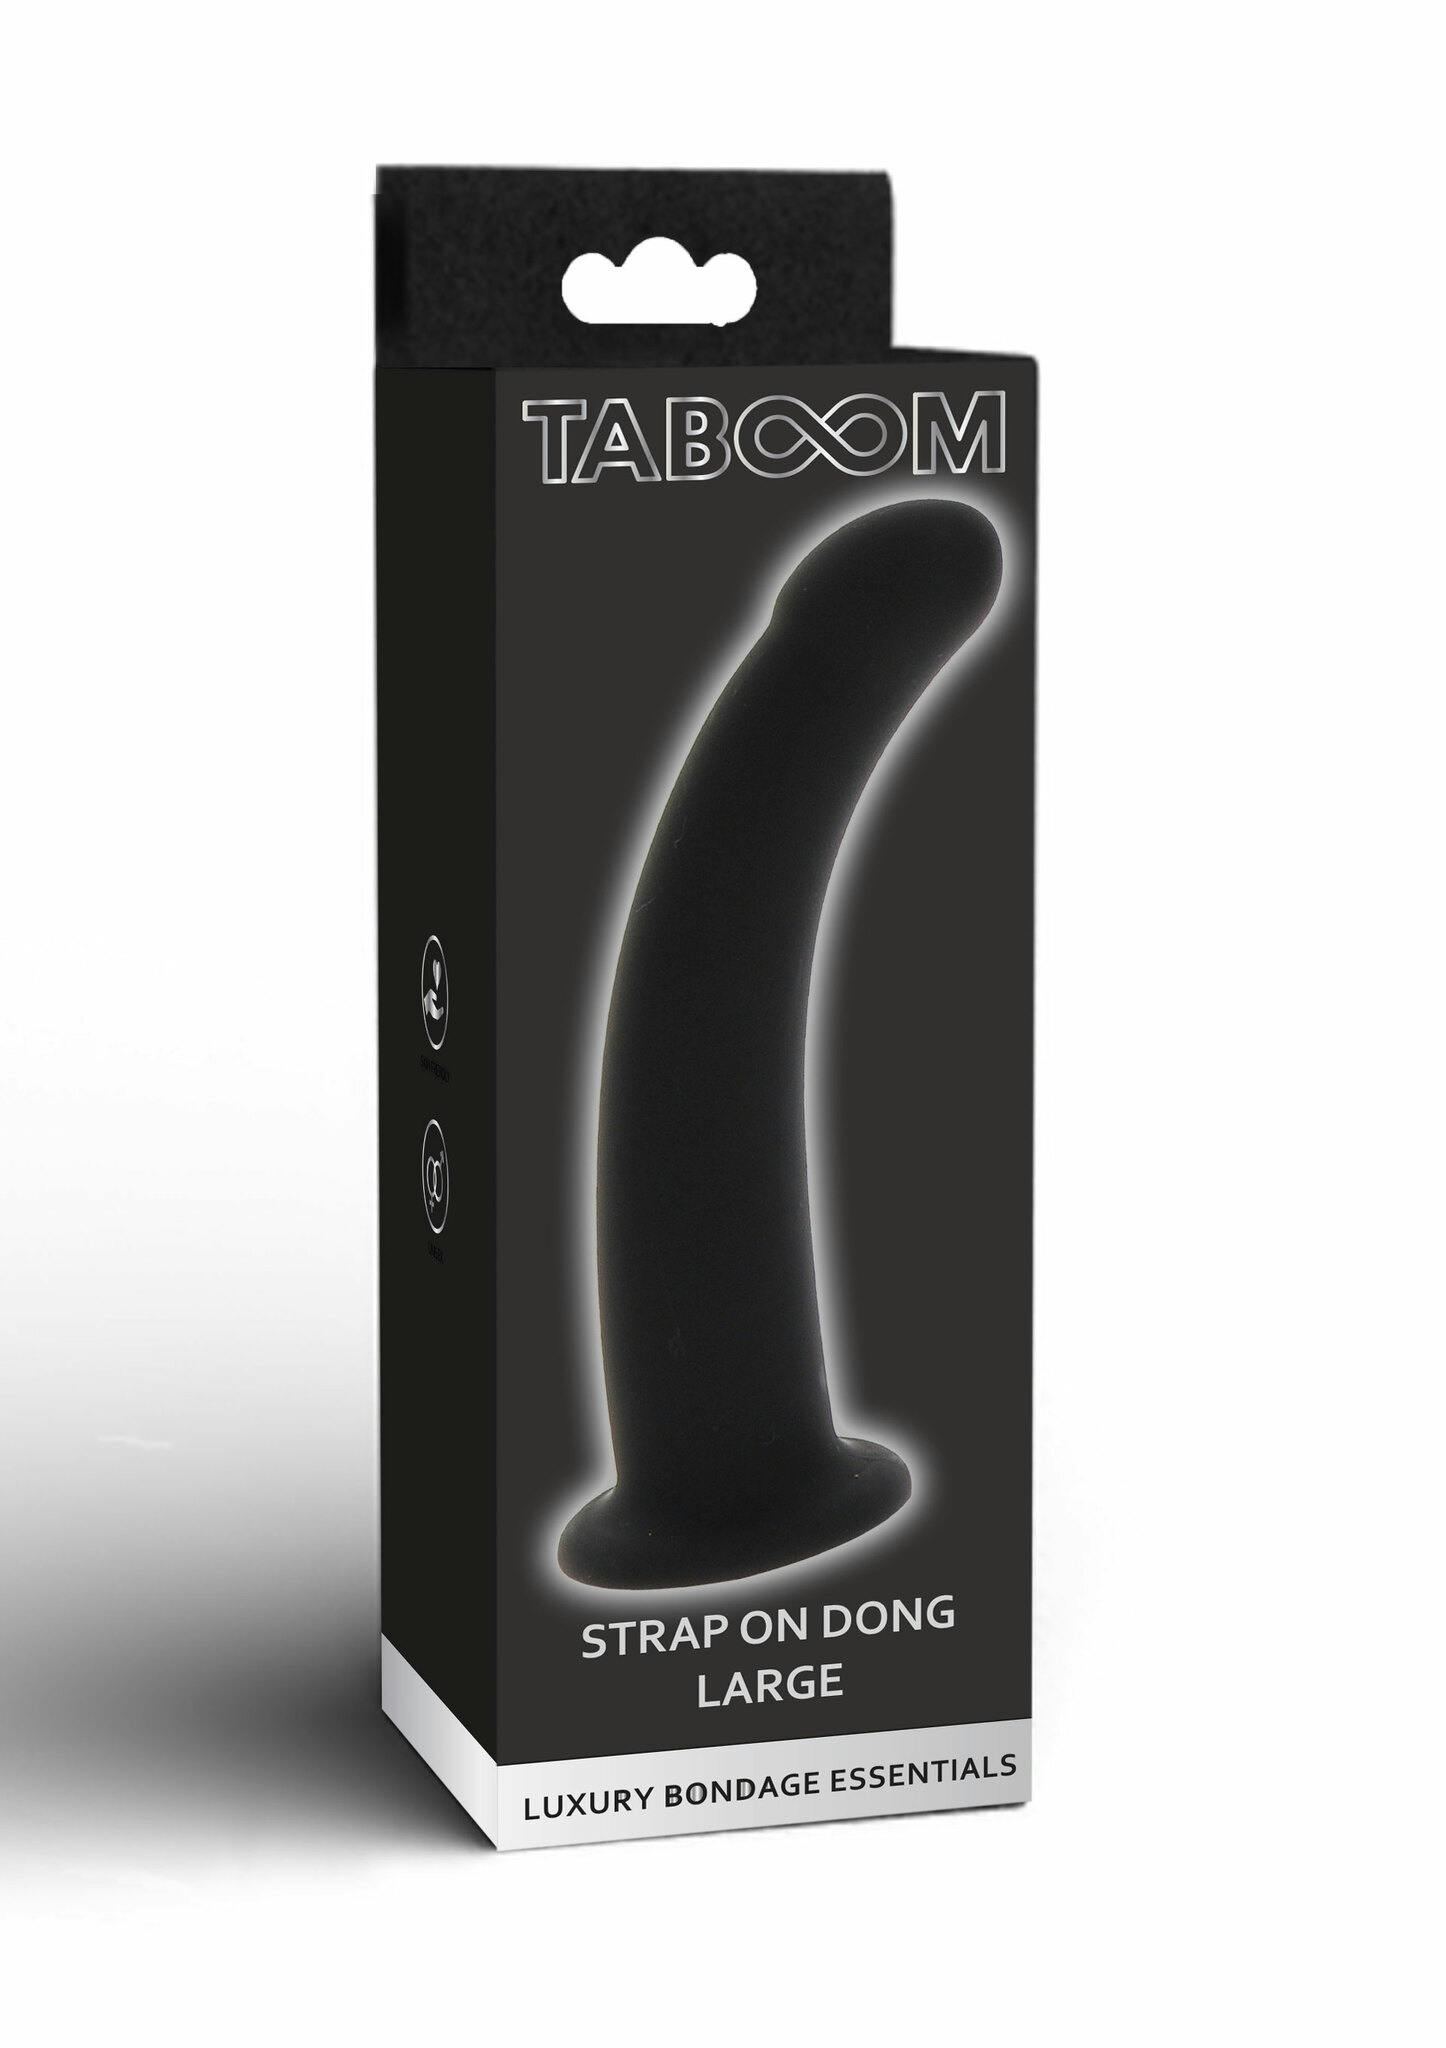 Taboom - Strap-On Dong Large